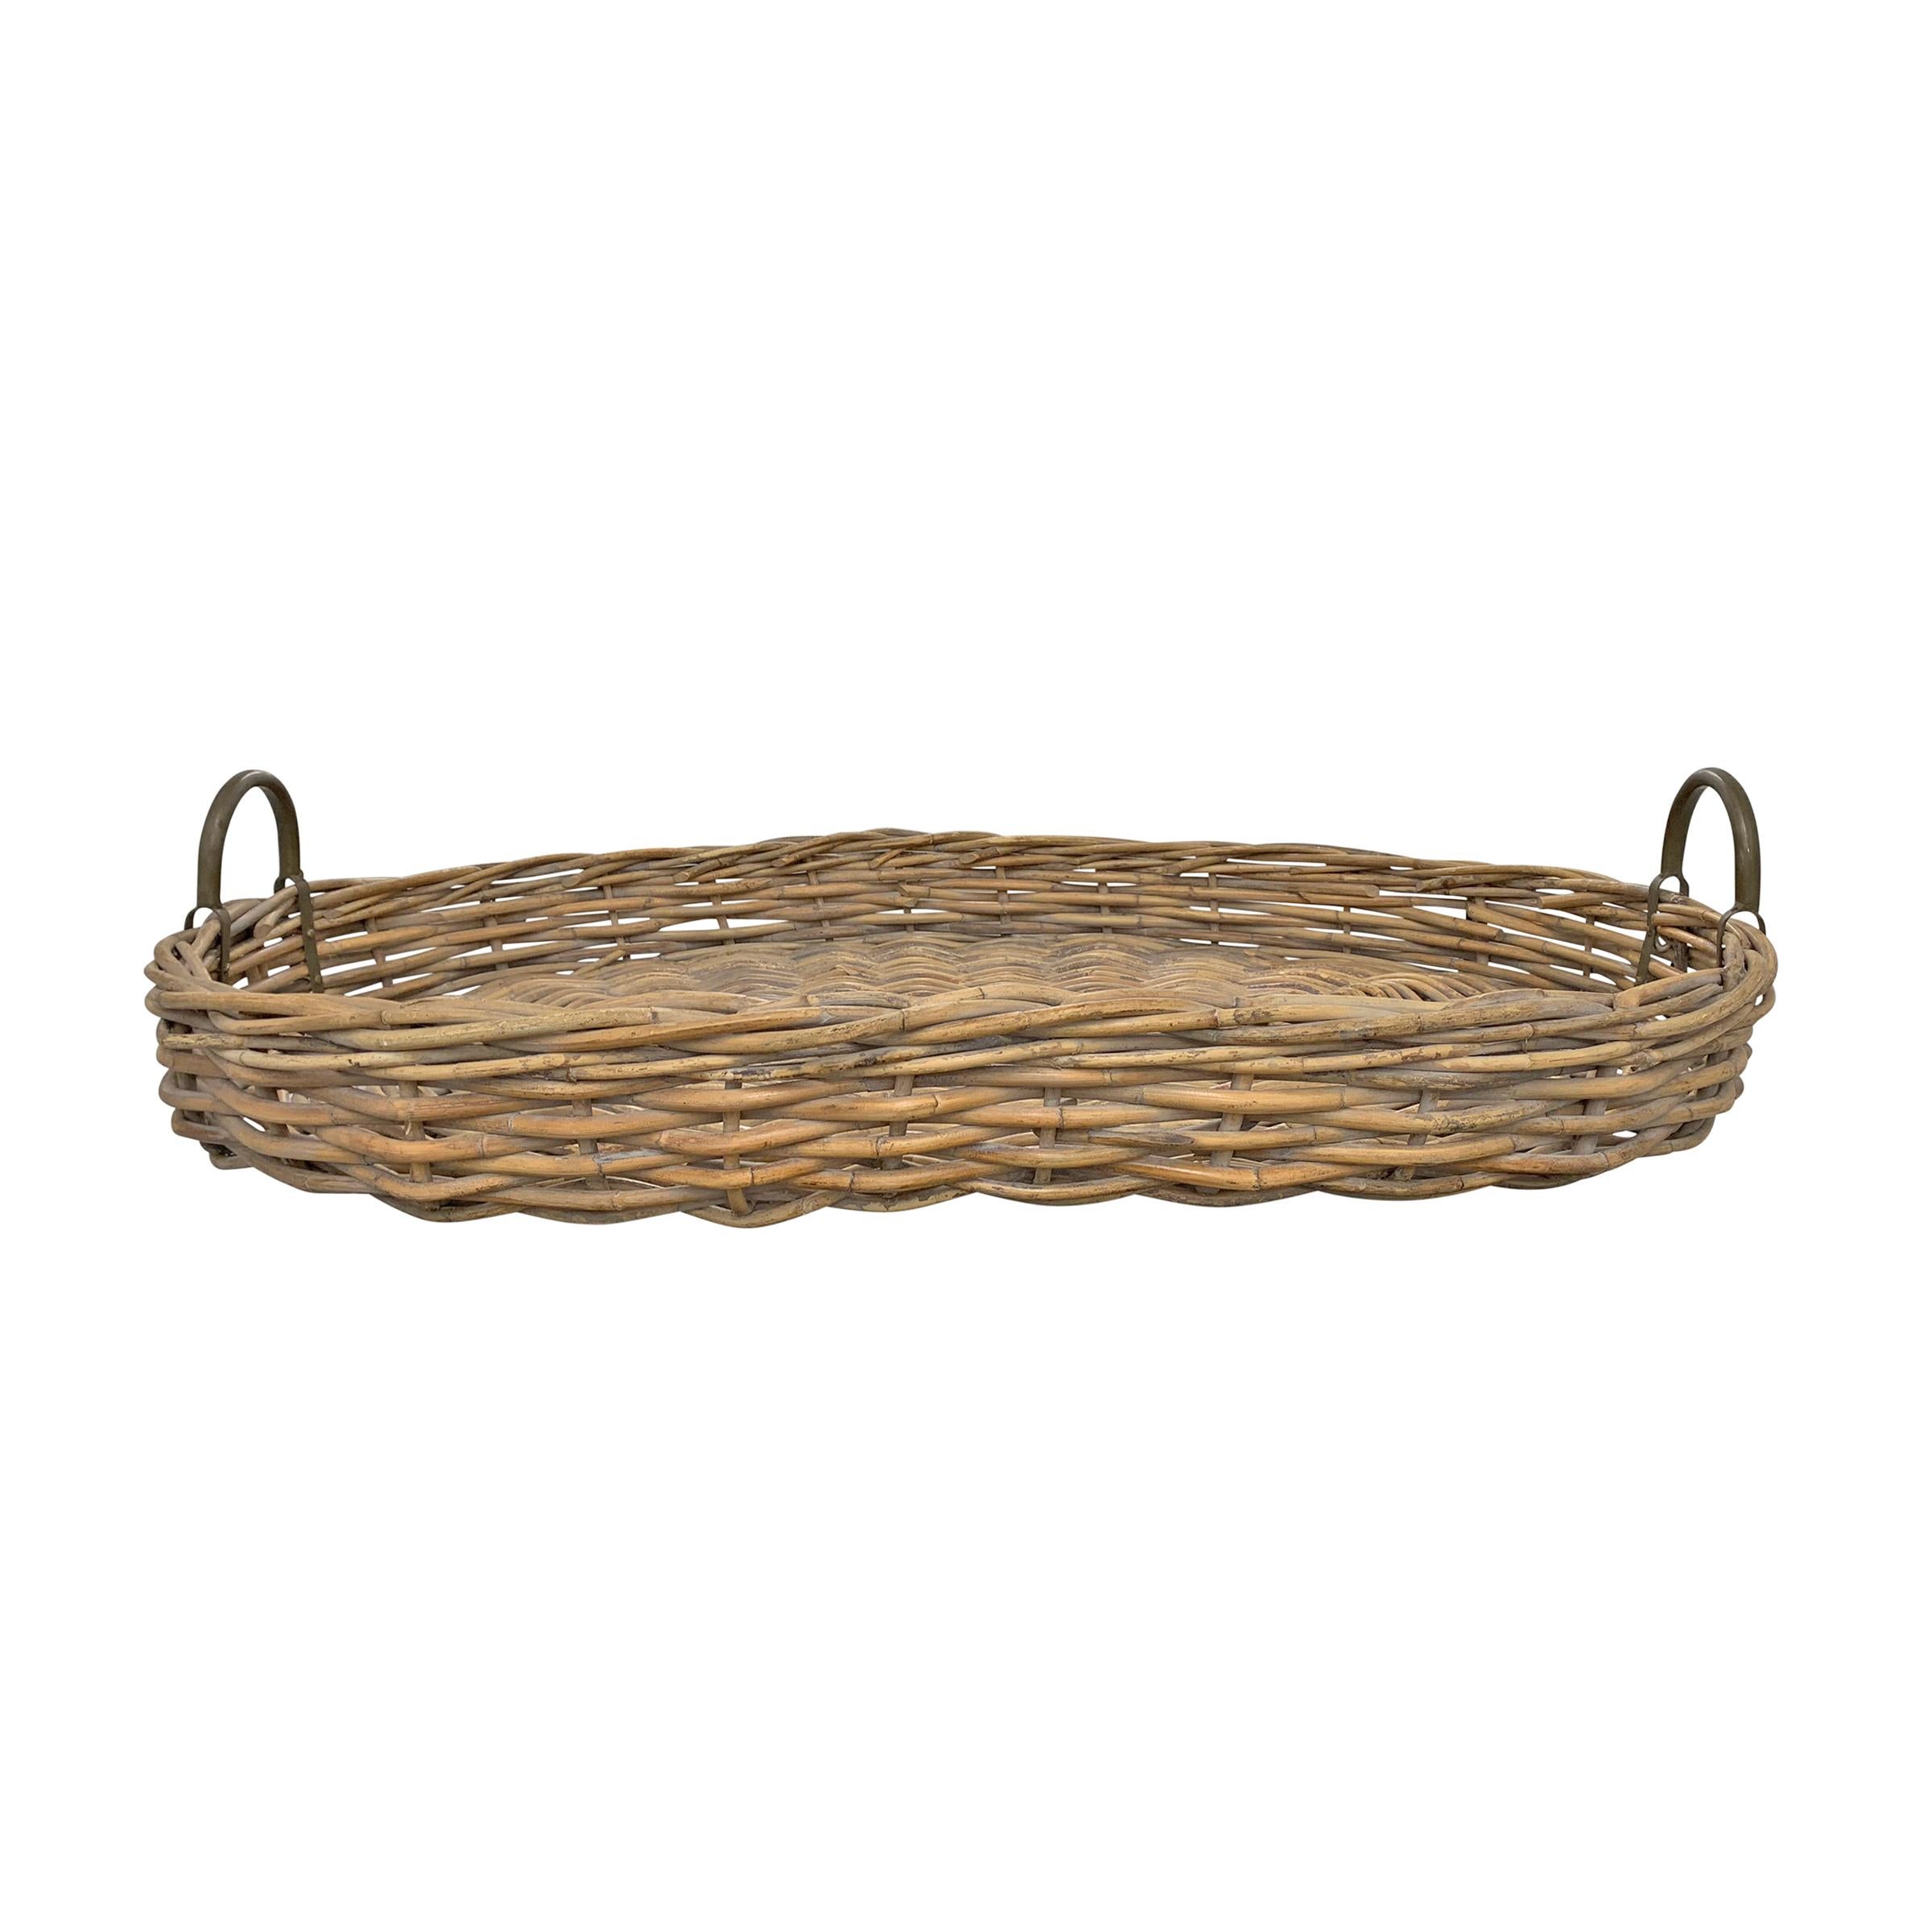 A wonderfully large-scale handwoven oval willow tray with metal handles, perfect for a large ottoman or on a sideboard.